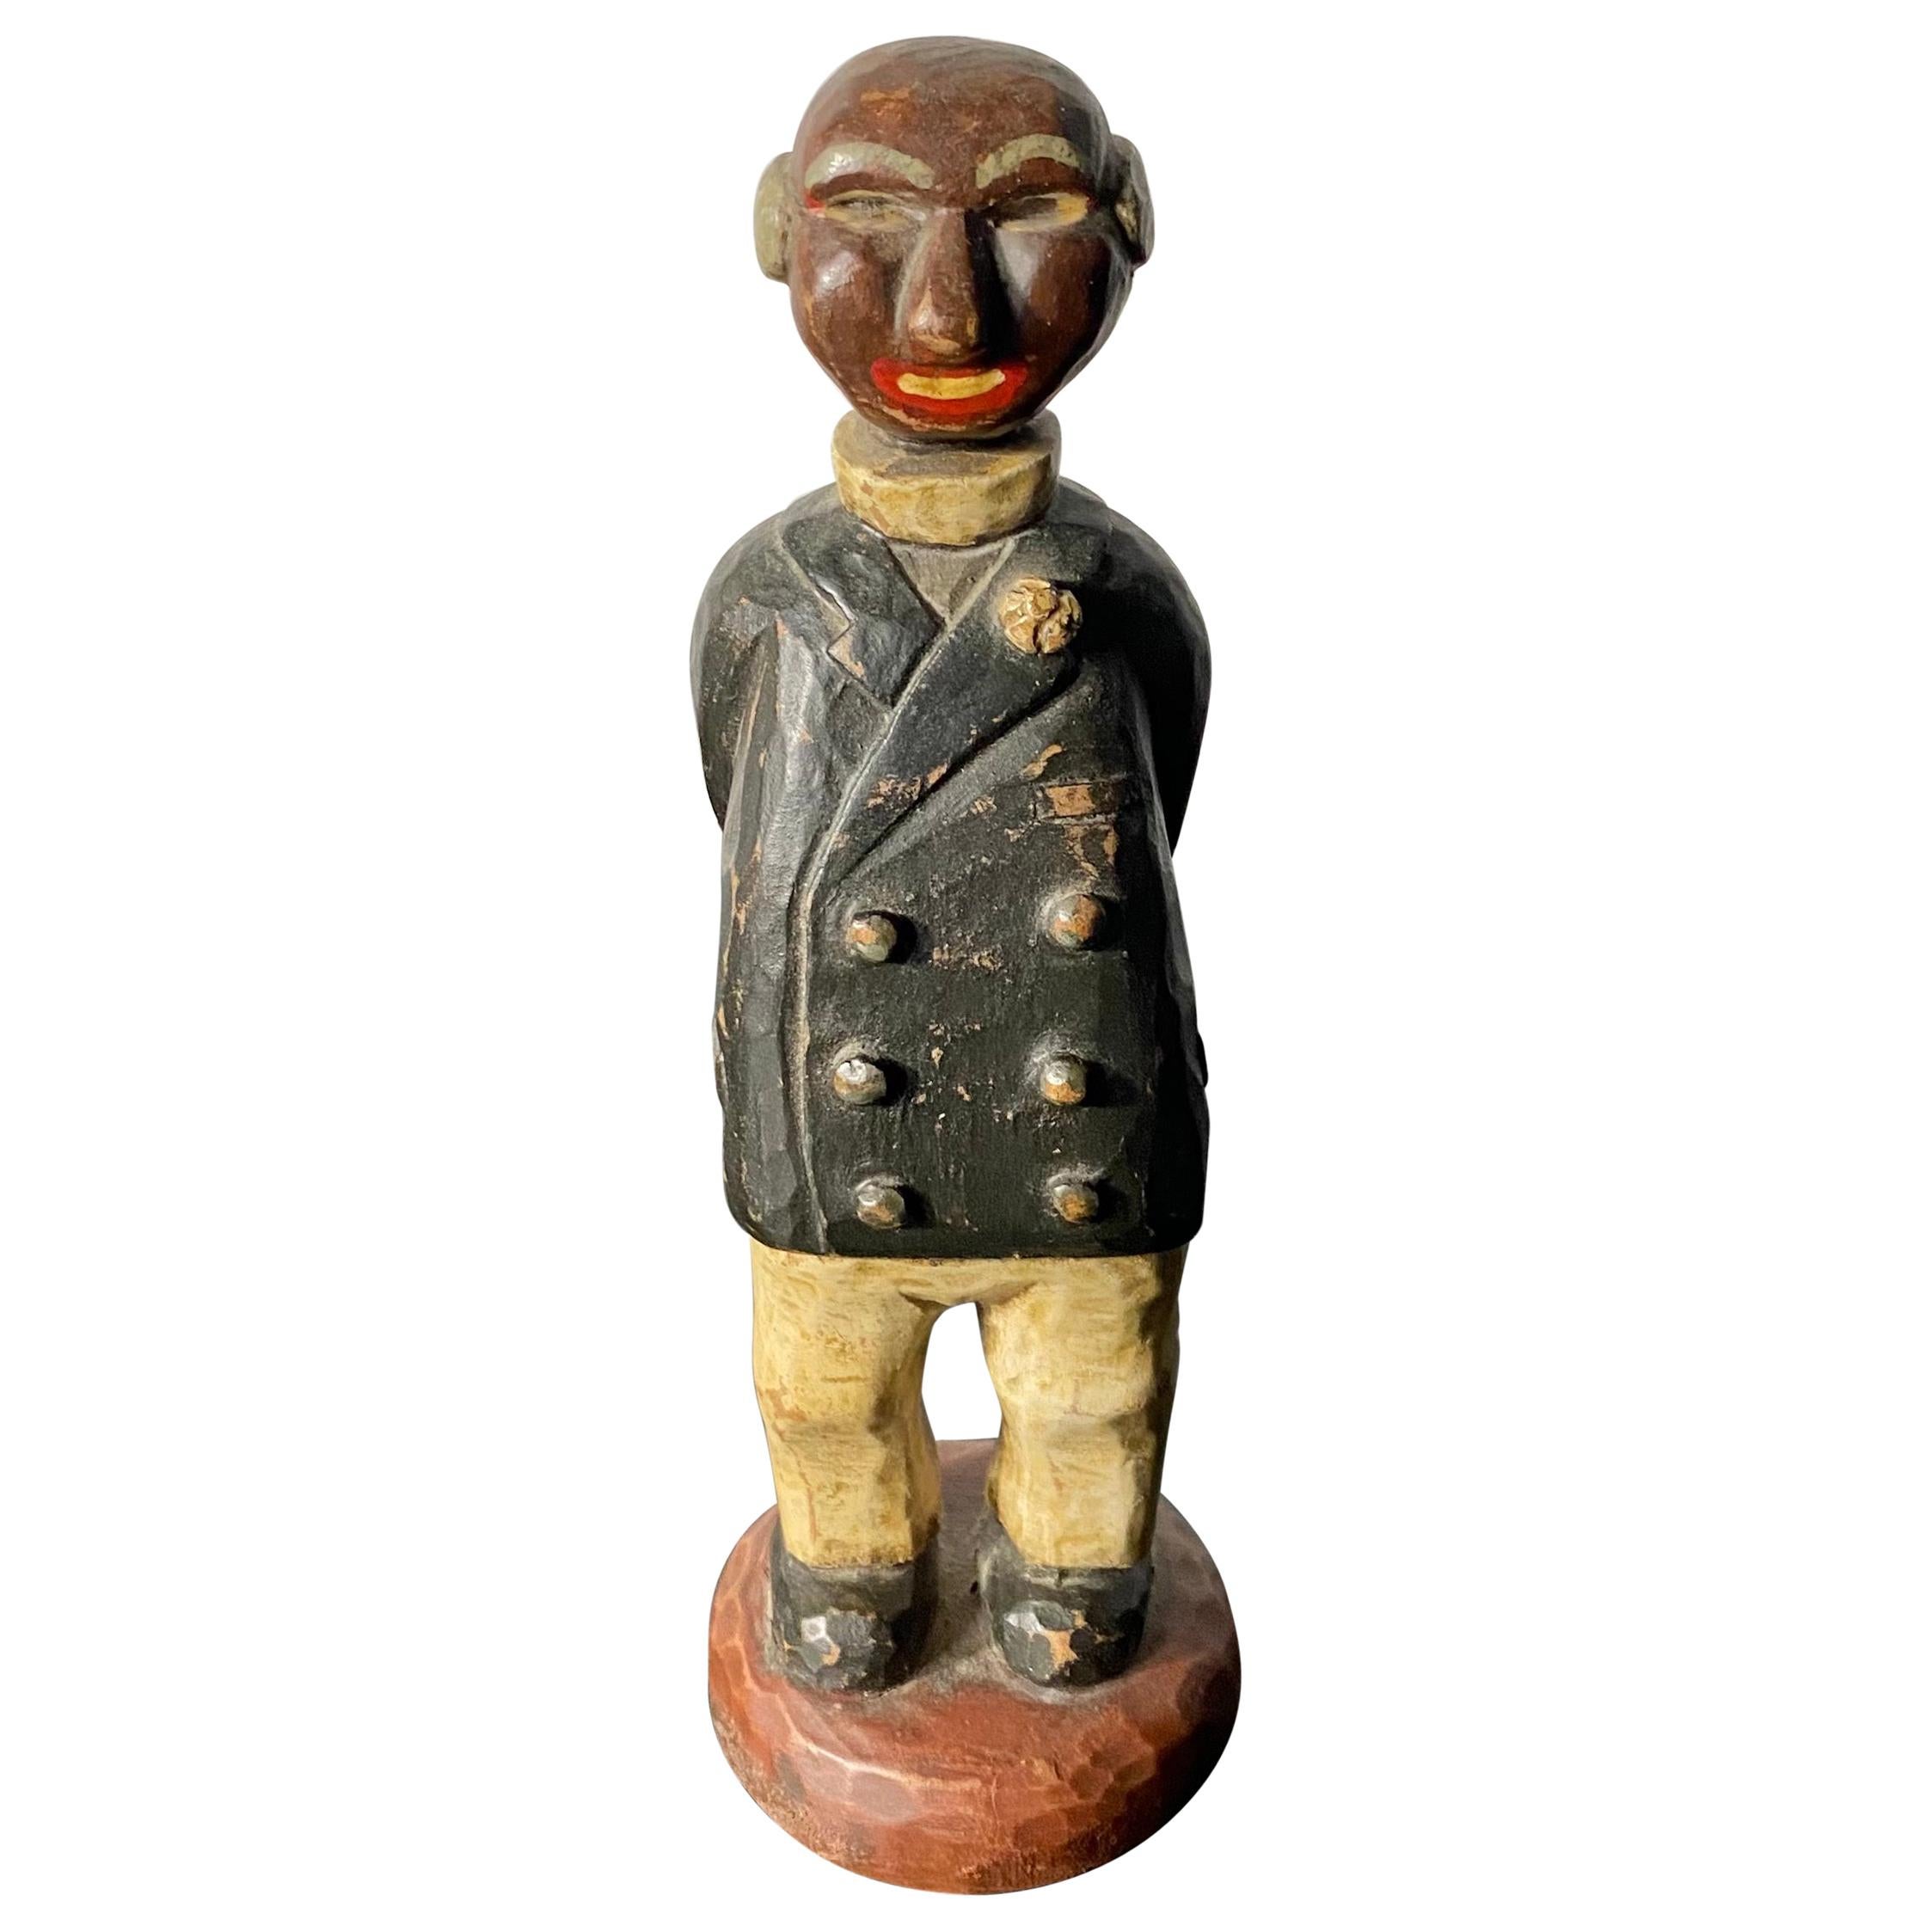 Charming Hand Carved and Painted  Folk Art Man Sculpture, by R.Holland